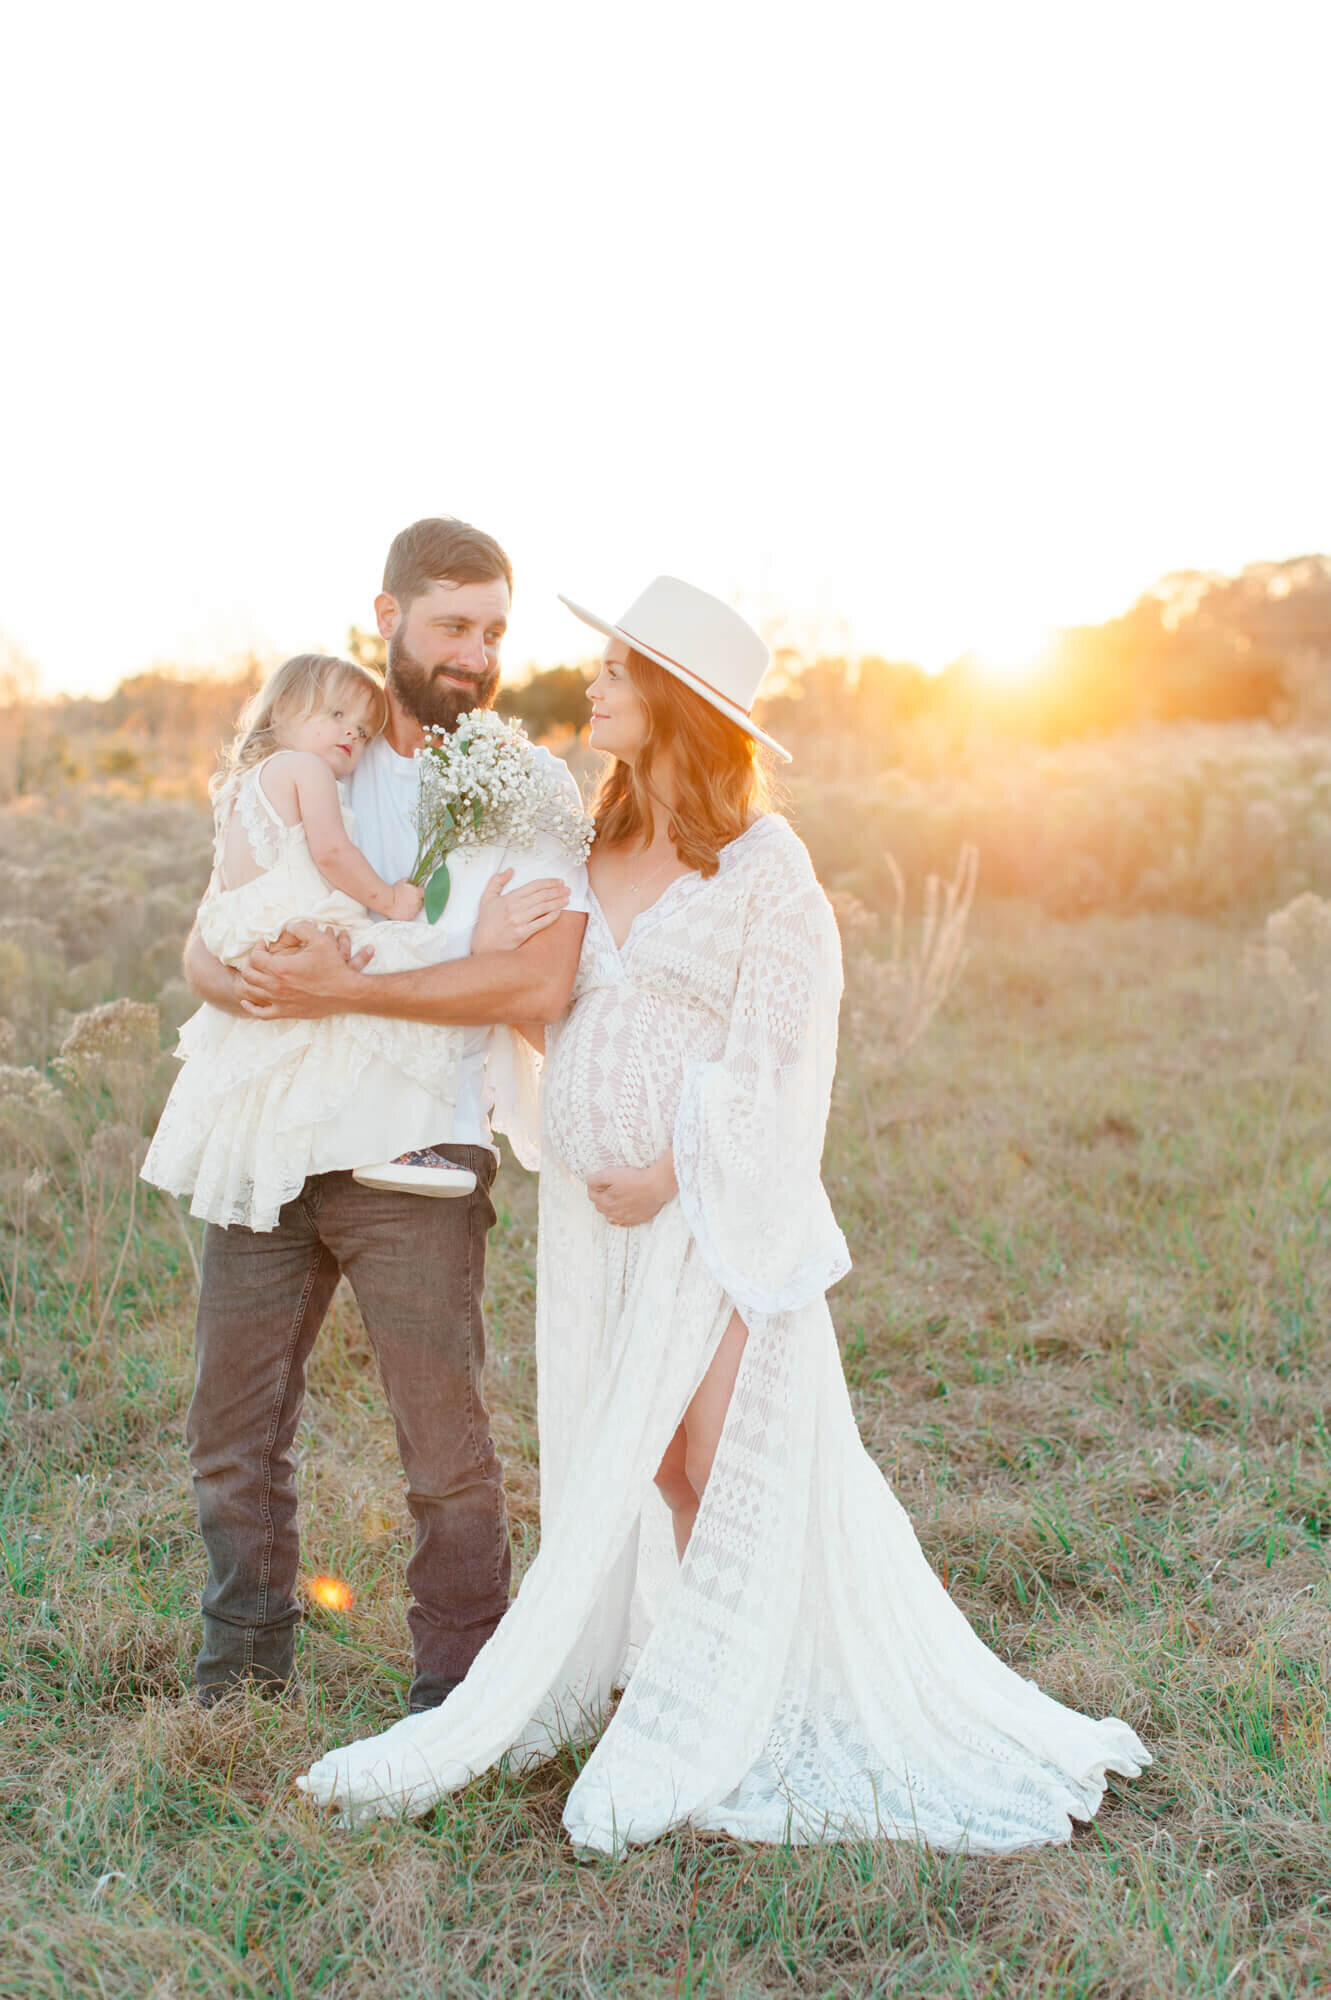 Expectant parents stand in a field at sunset holding toddler daughter